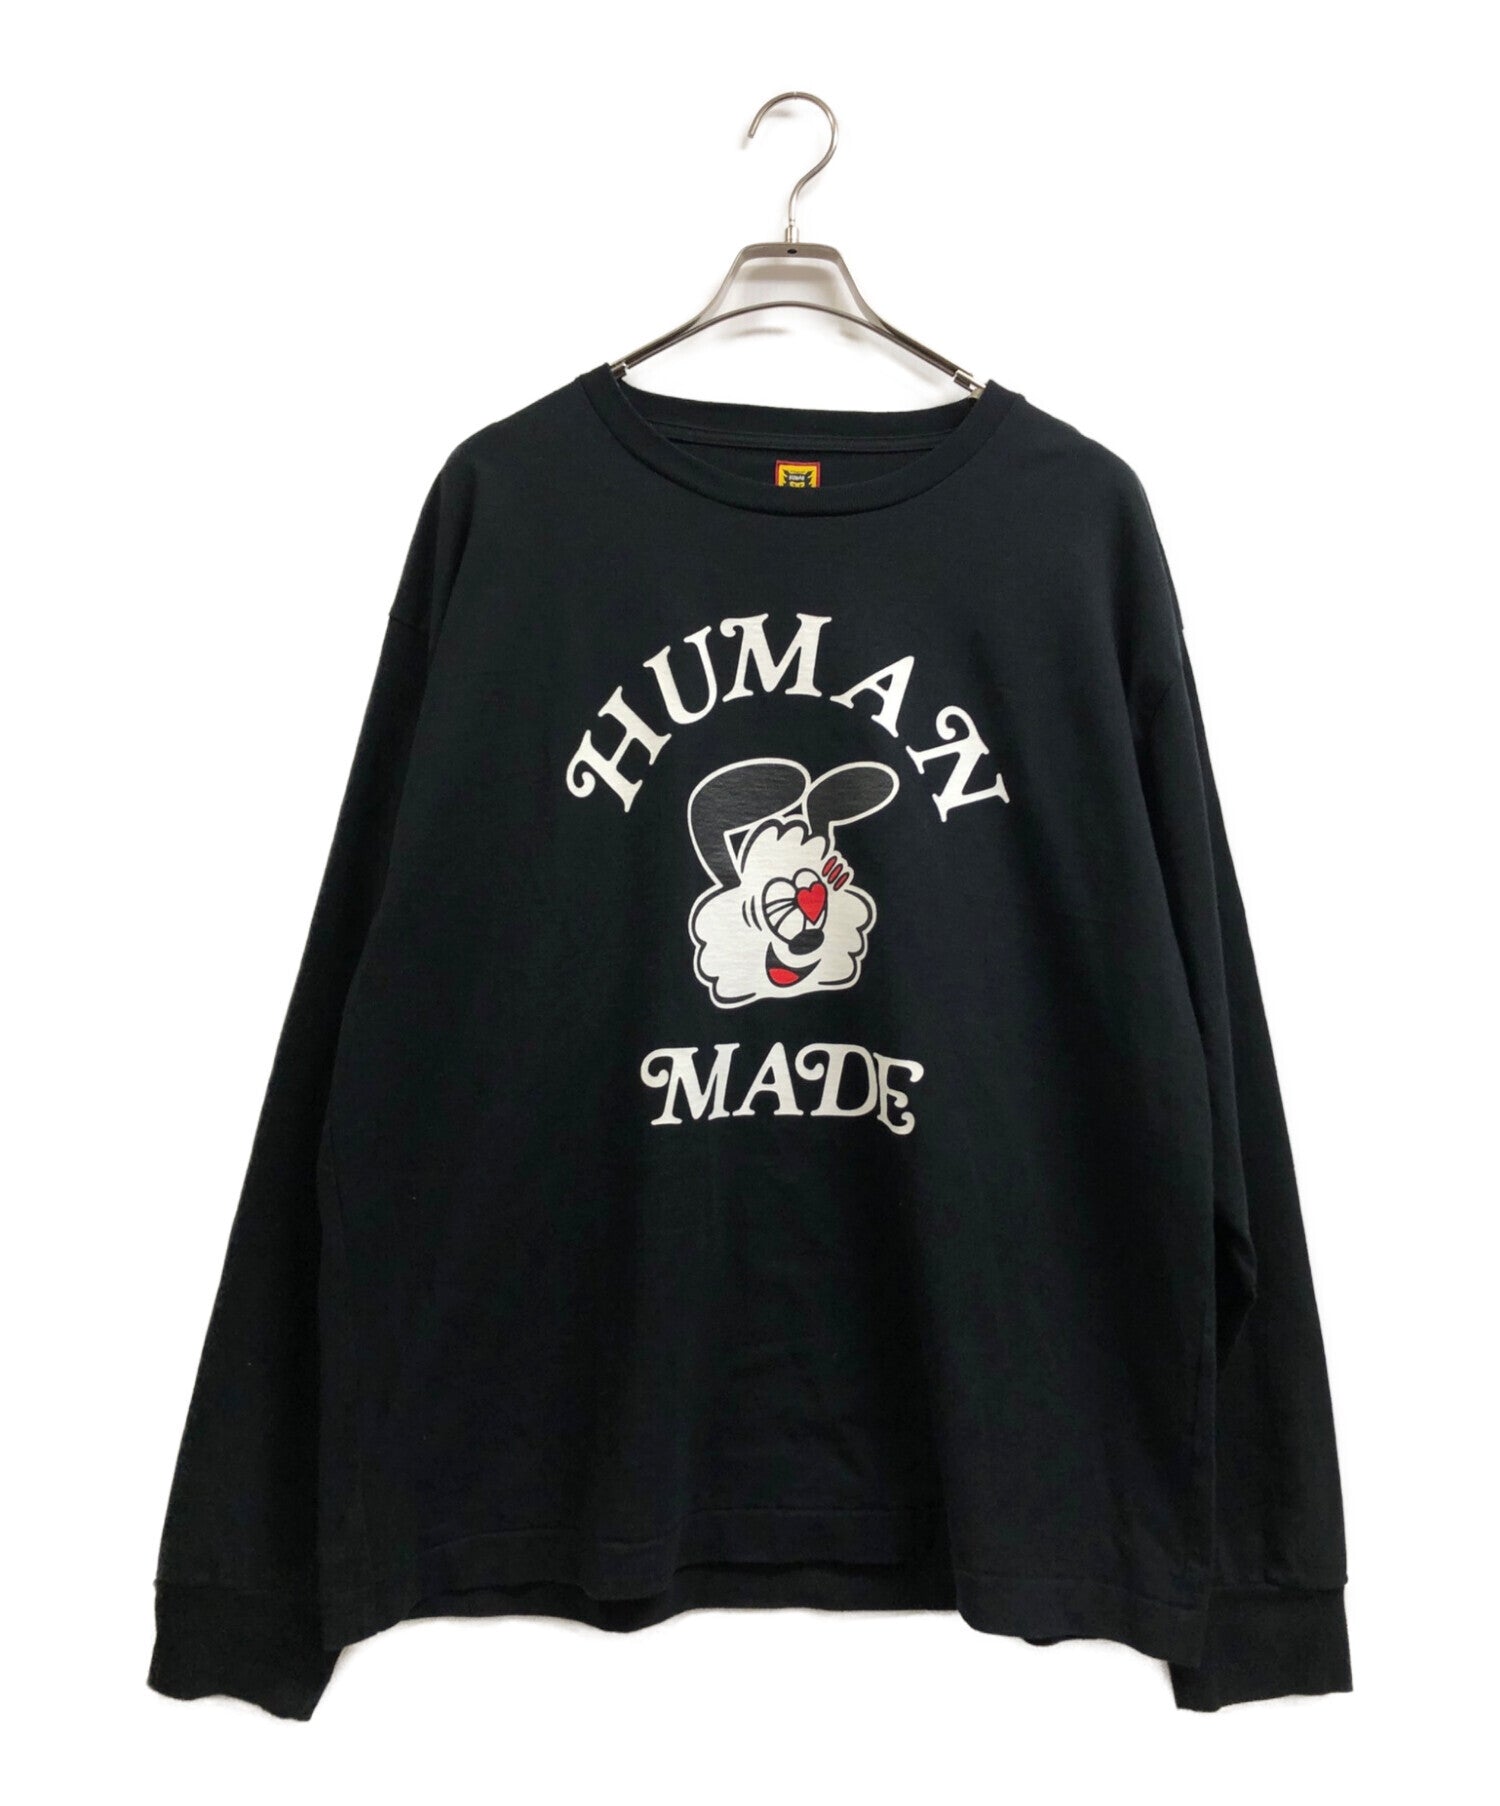 HUMAN MADE GDC VALENTINE'S DAY LONG SLEEVE T-SHIRT